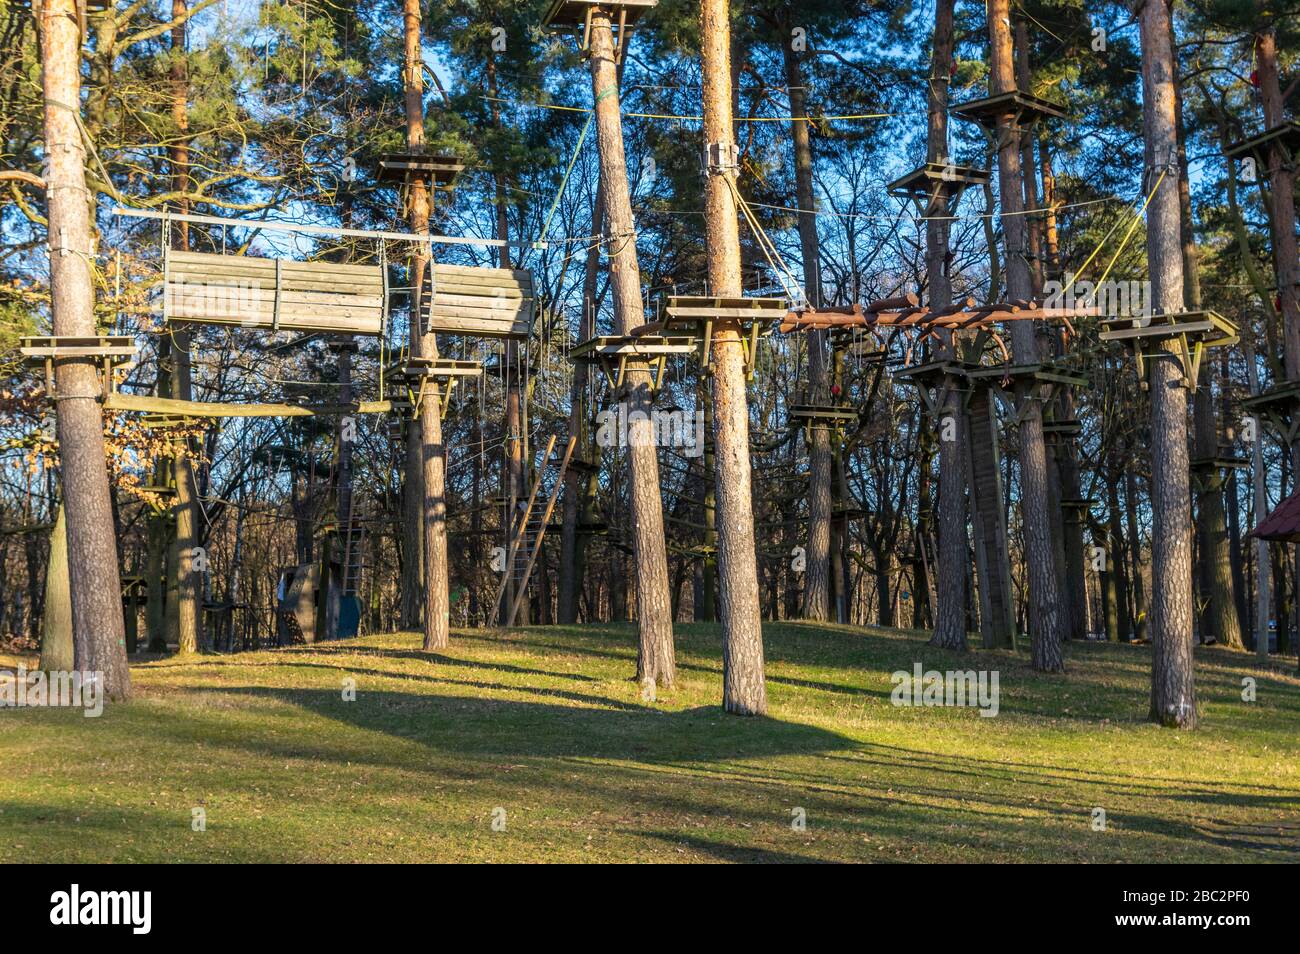 Climbing garden, high ropes course in the forest with various climbing elements and safety ropes between the individual trees and benches to rest Stock Photo